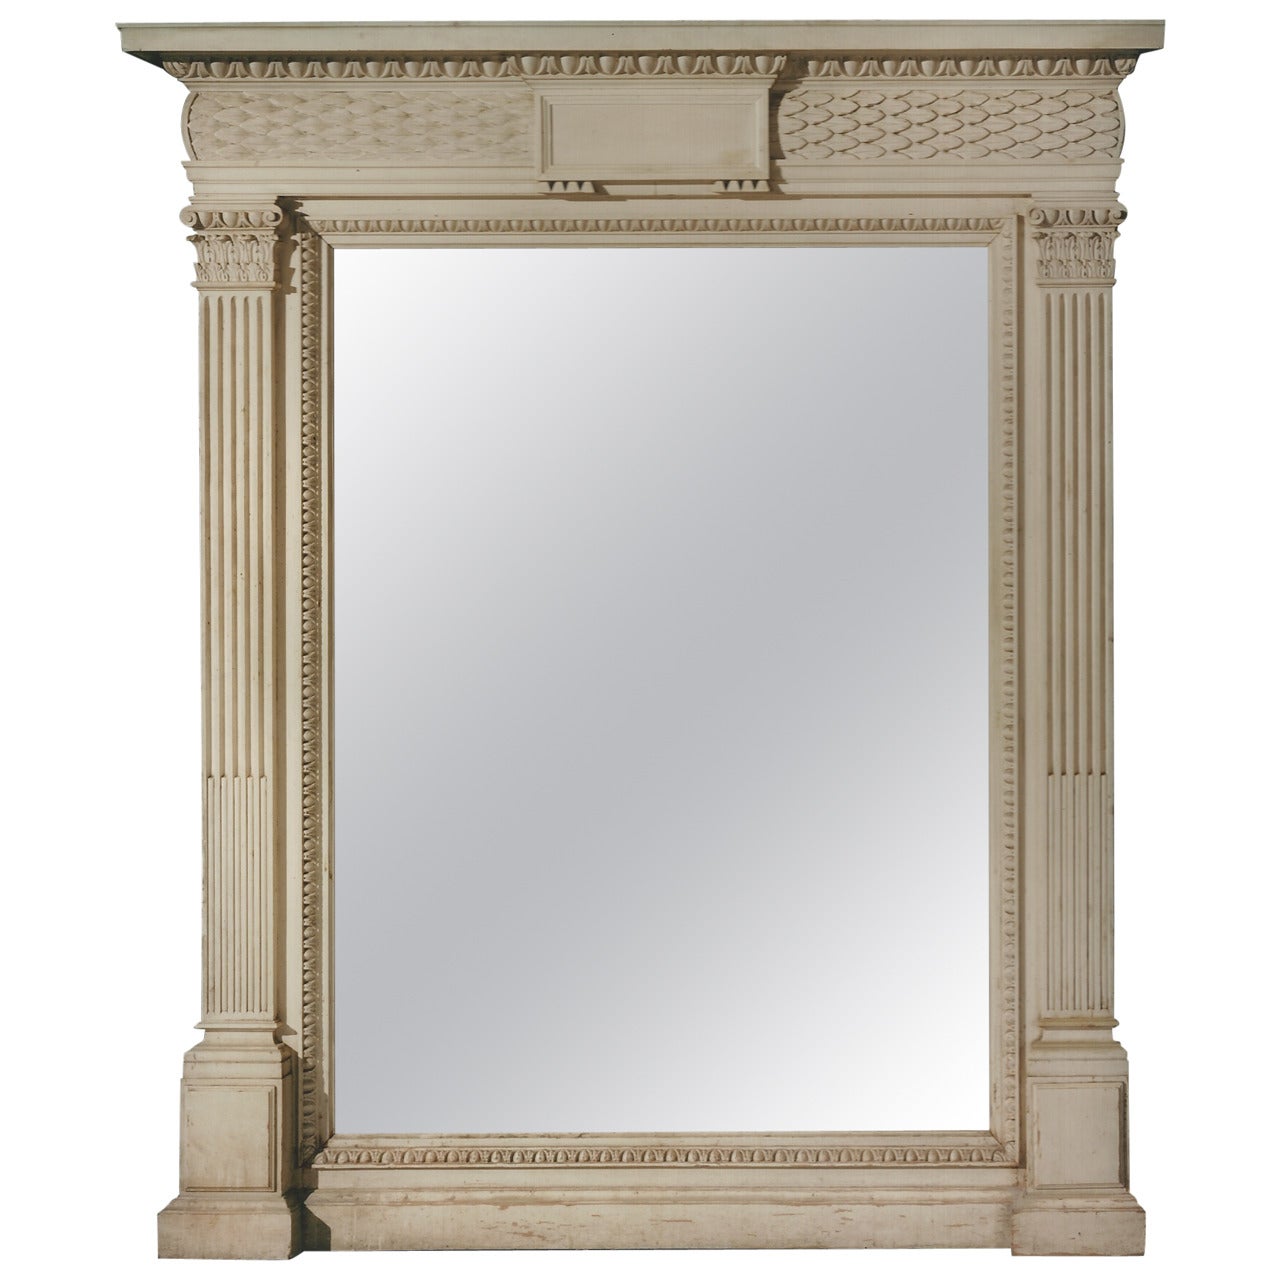 Neoclassical Architectural Overmantel Mirror For Sale